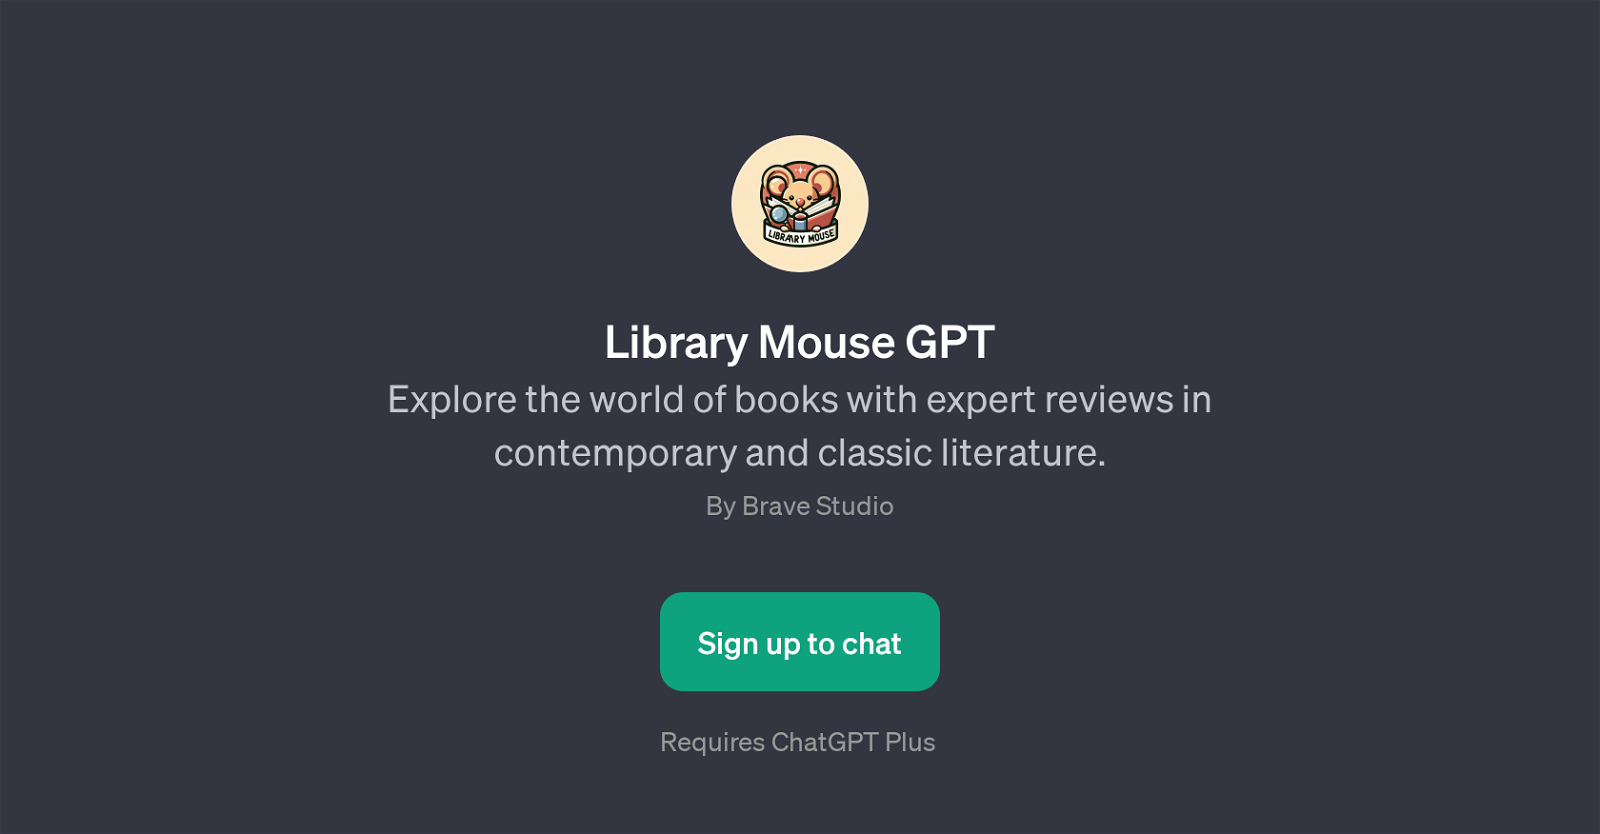 Library Mouse GPT website